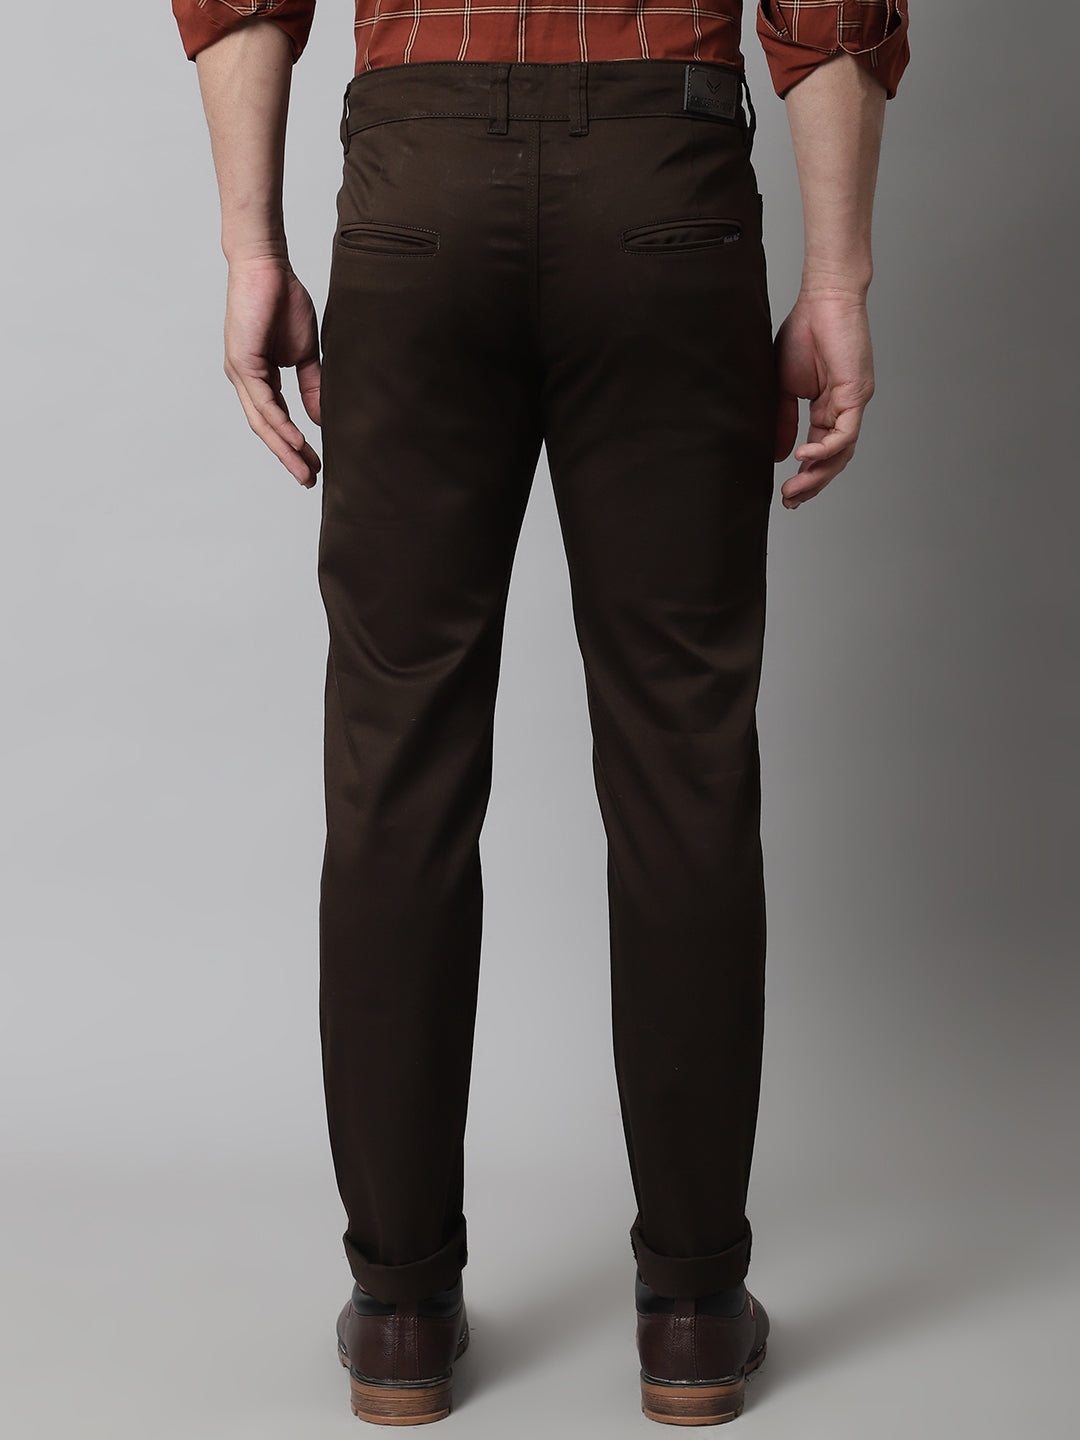 Majestic Man Regular Fit Satin Finish Cotton Casual Solid Chinos Trouser - Brown